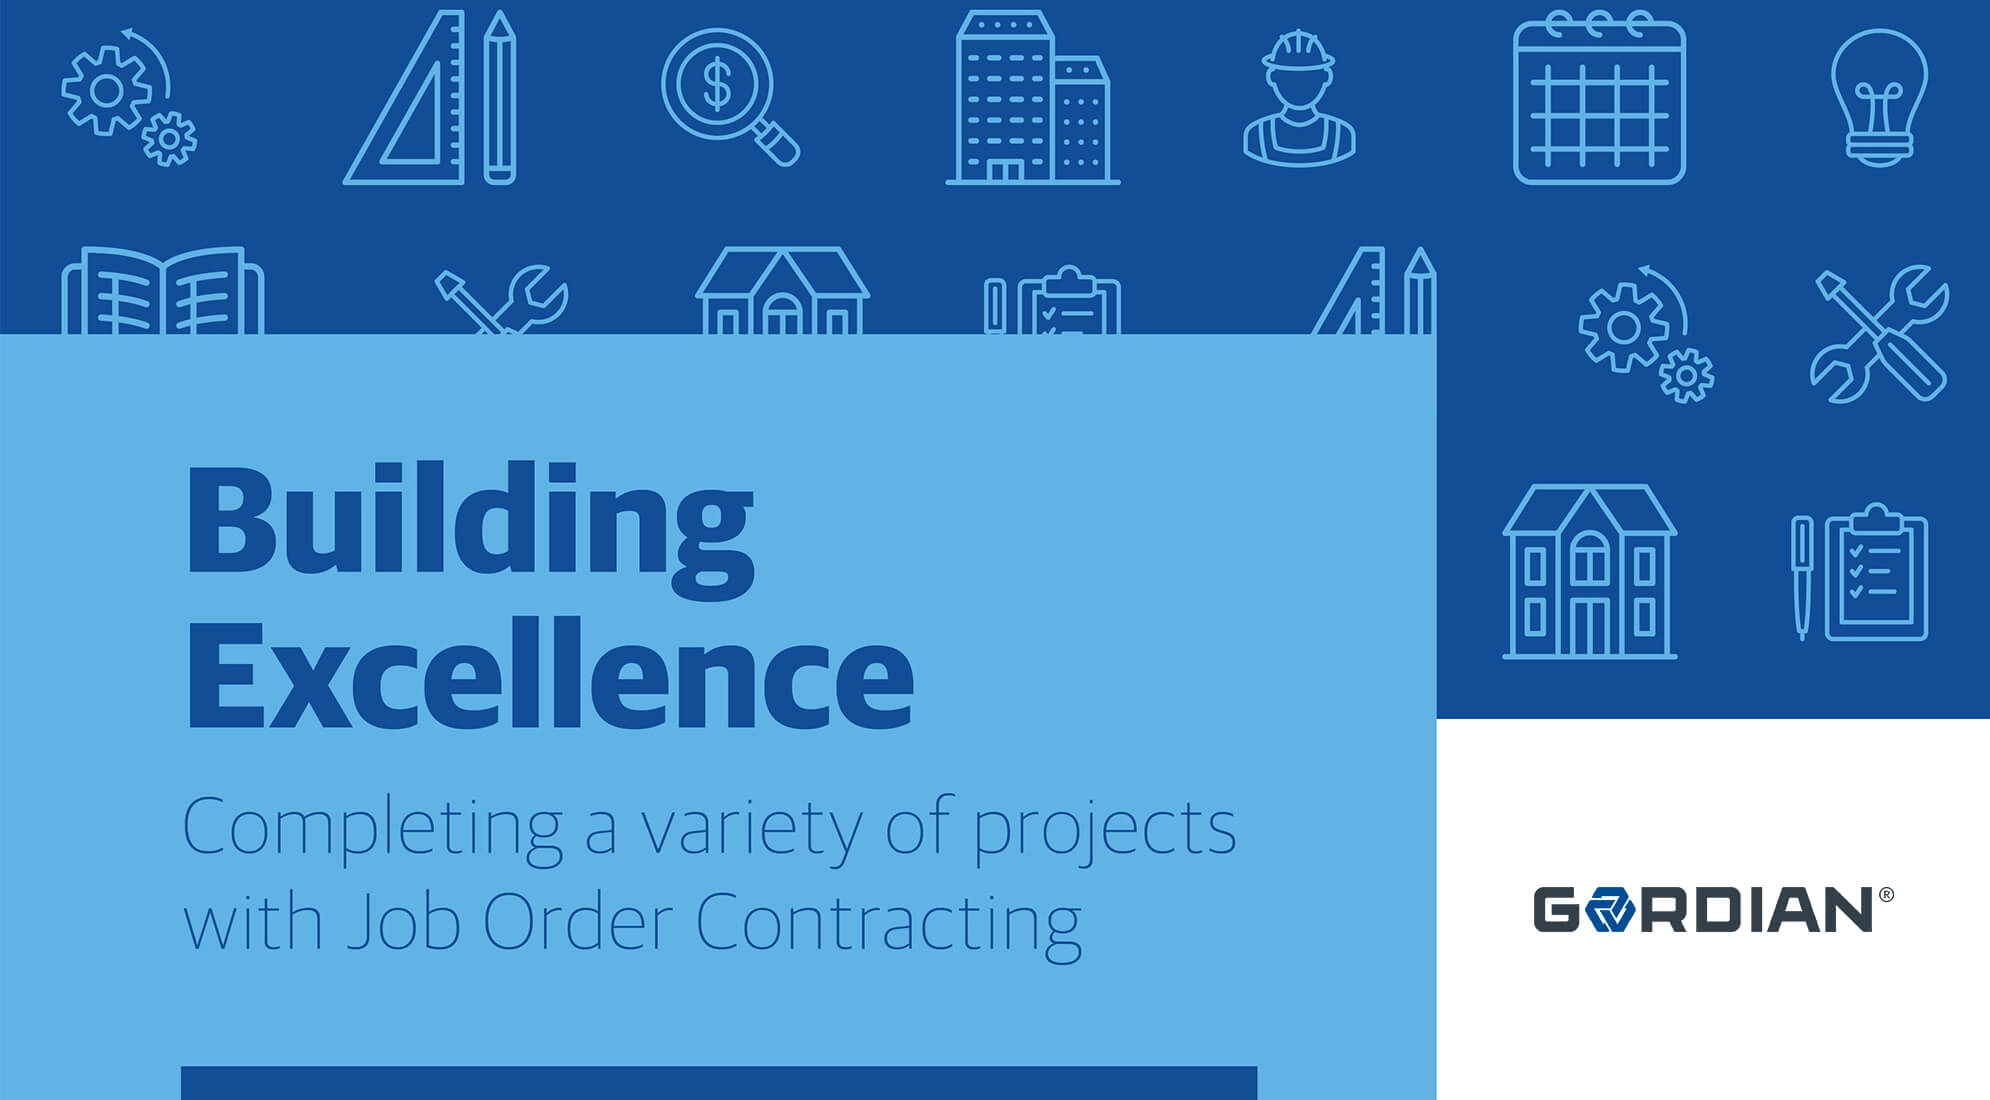 Building Excellence with Job Order Contracting.